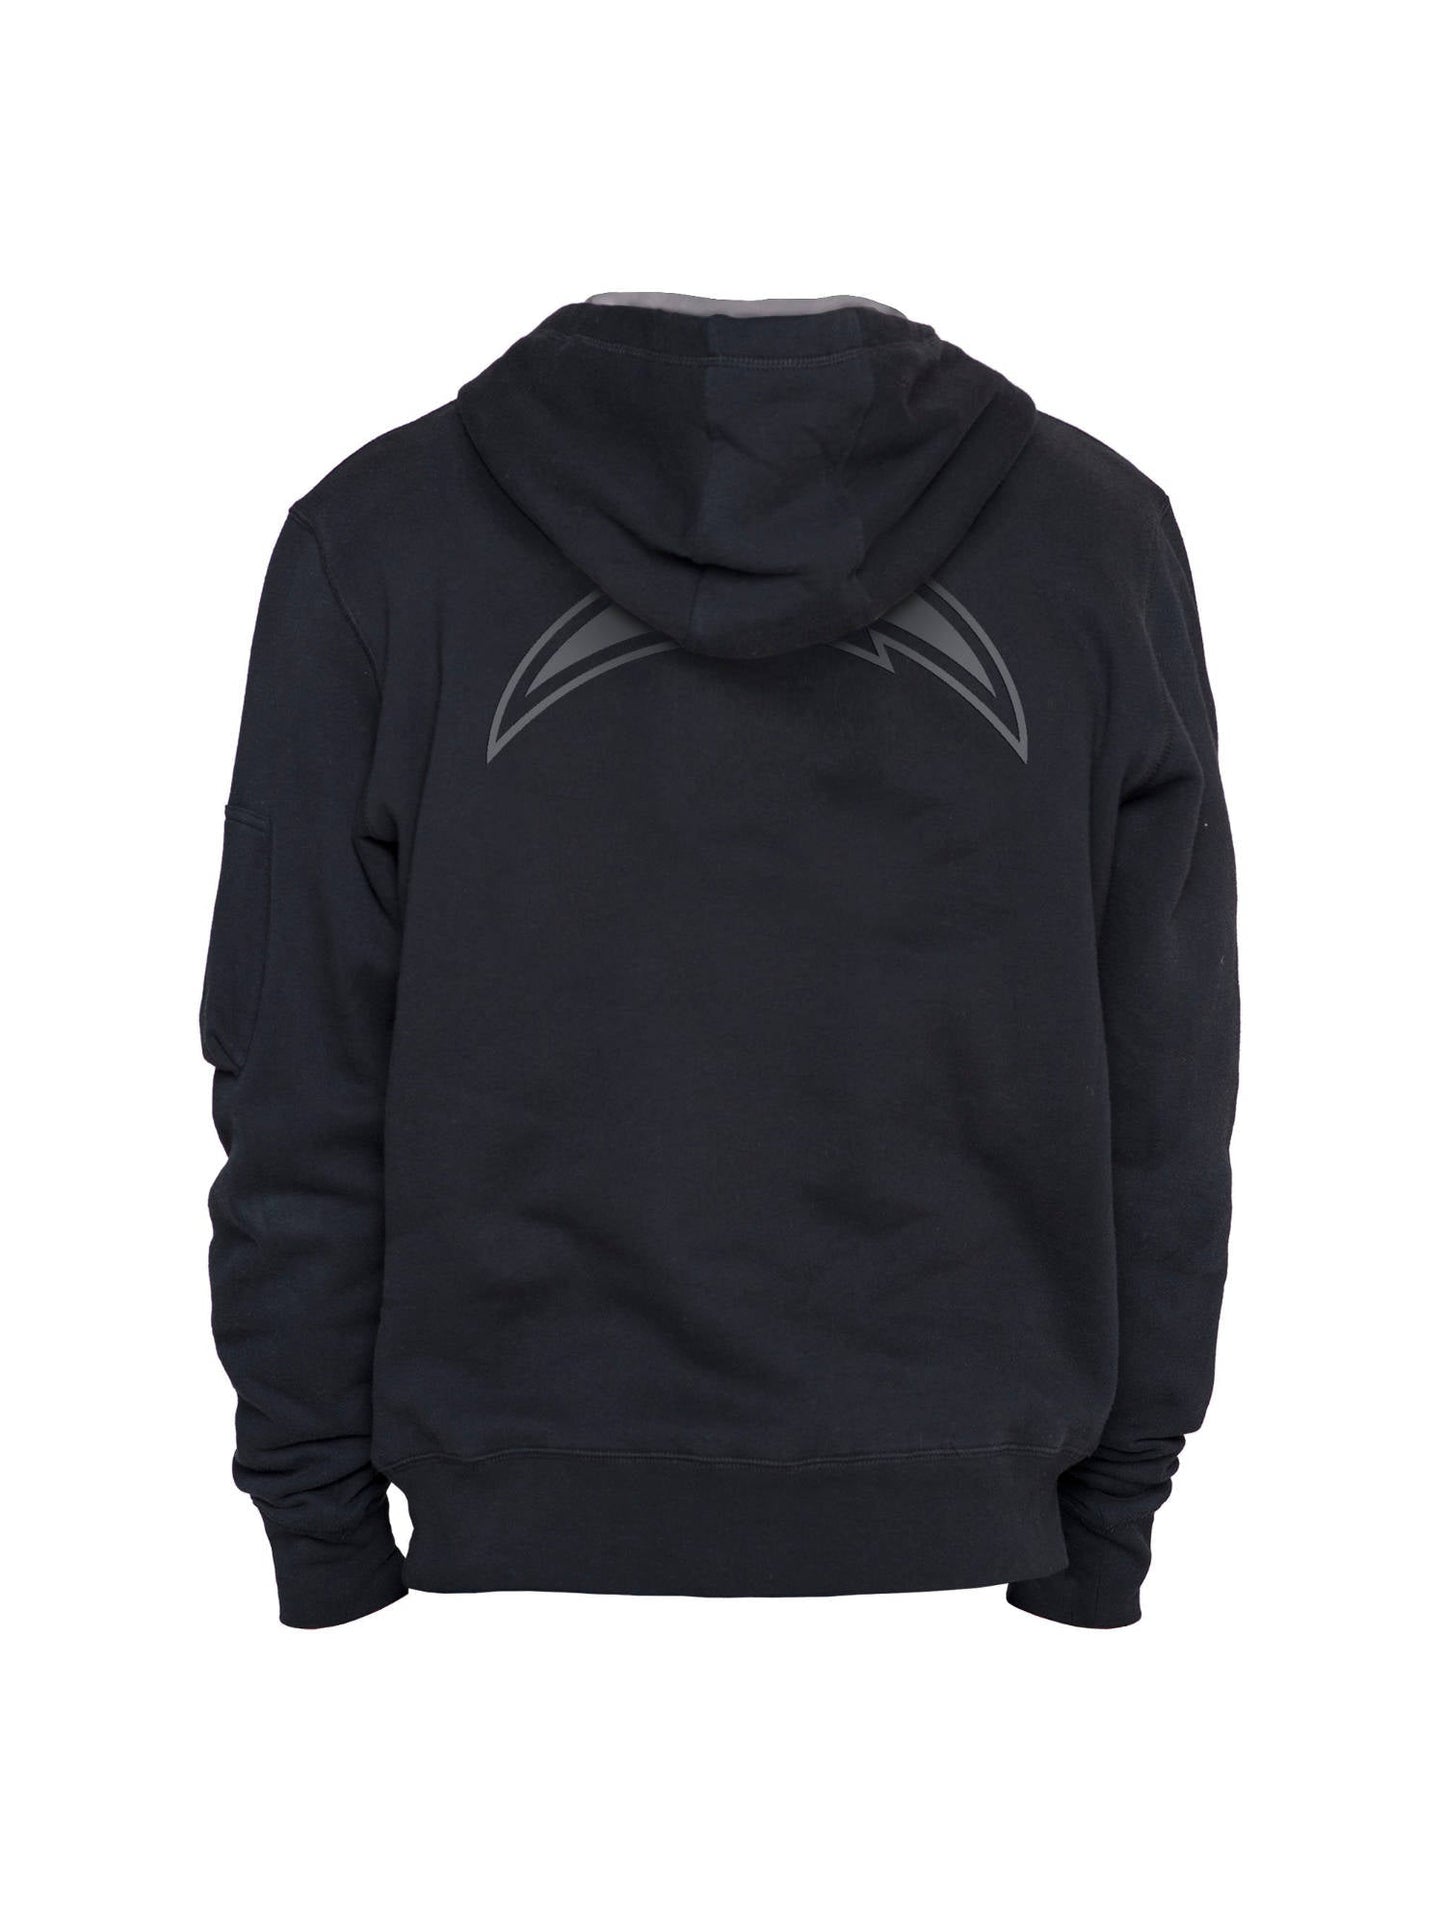 LOS ANGELES CHARGERS X ALPHA X NEW ERA HOODIE TOP Alpha Industries 